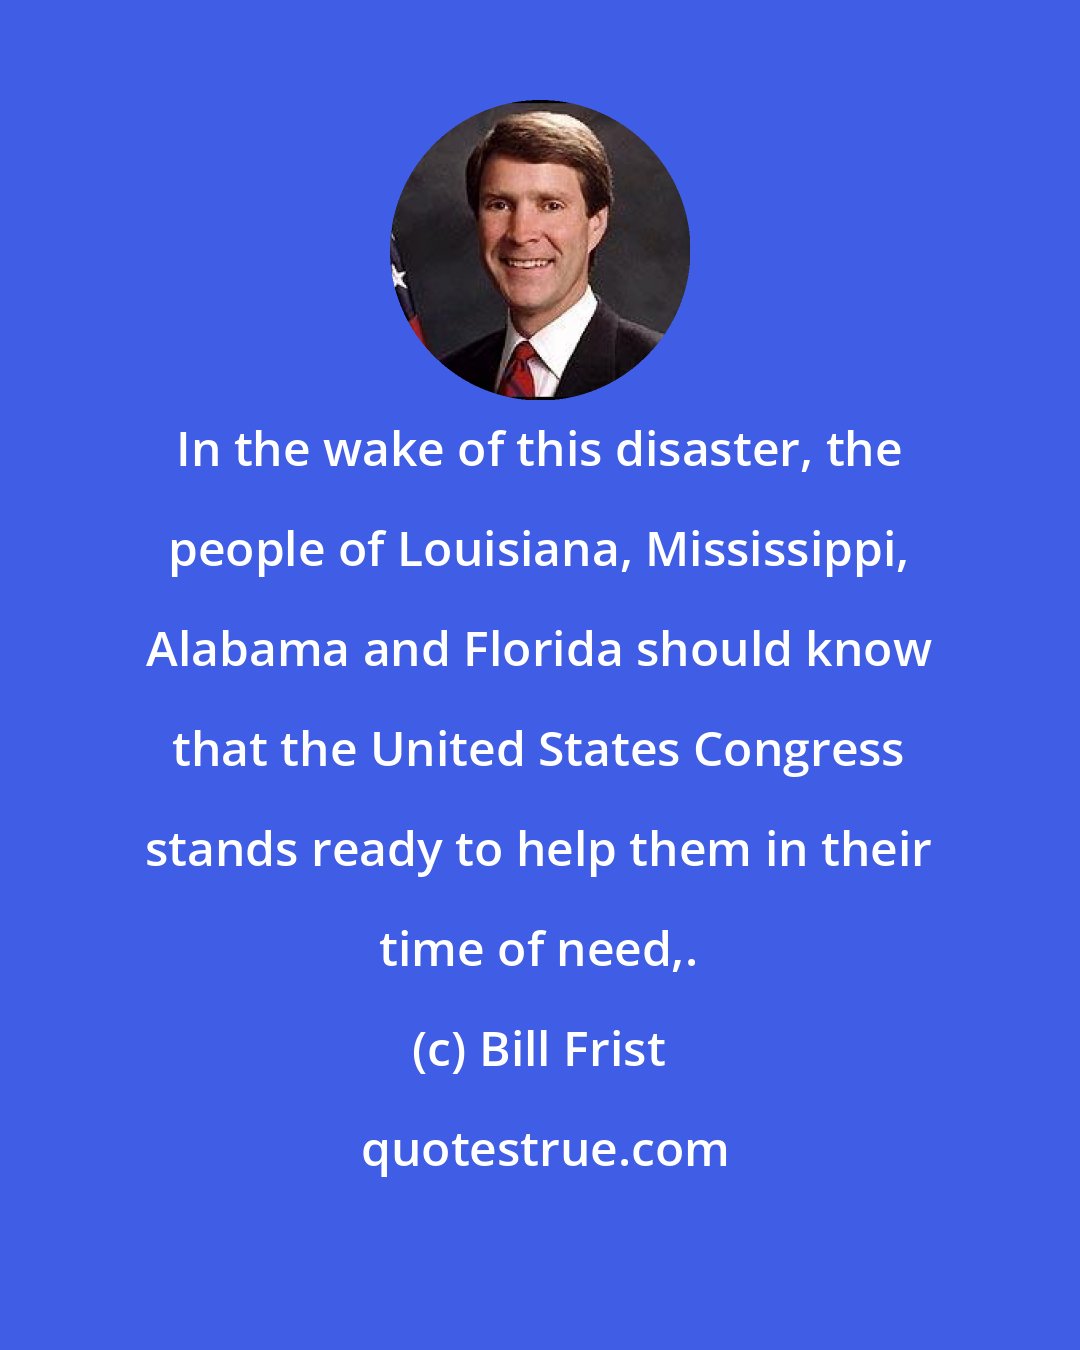 Bill Frist: In the wake of this disaster, the people of Louisiana, Mississippi, Alabama and Florida should know that the United States Congress stands ready to help them in their time of need,.